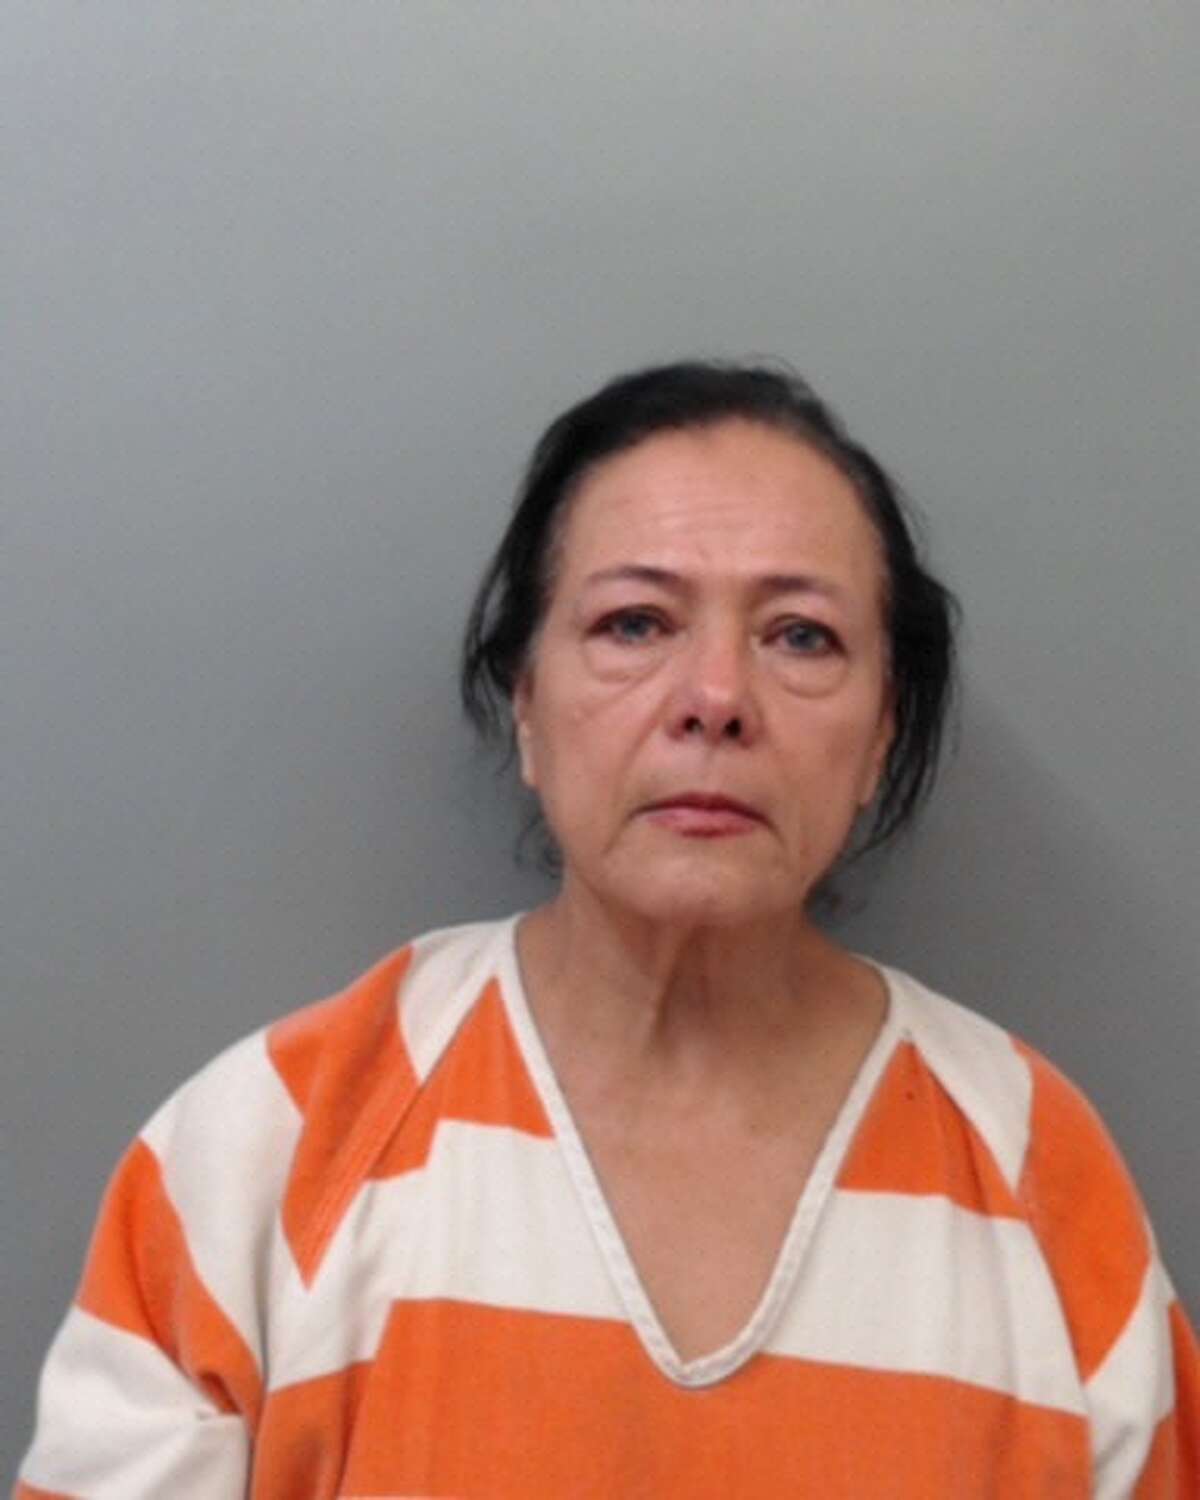 Magdalena Mulgado Zepulveda, 73, was charged with 12 counts of forgery and one count of fraudulent use, possession of identifying information.